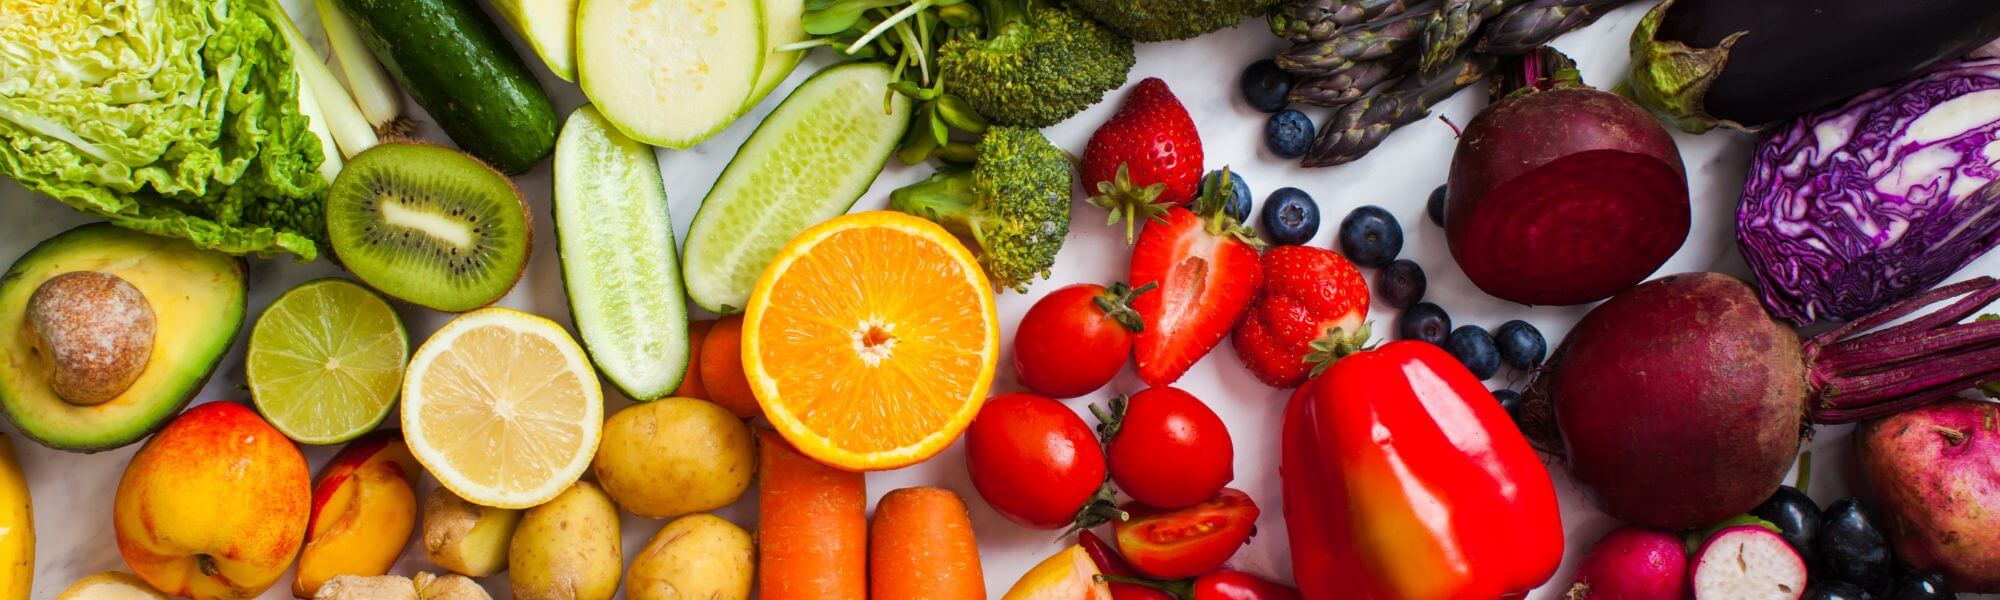 7 Reasons Why You Should Eat More Fruits and Vegetables